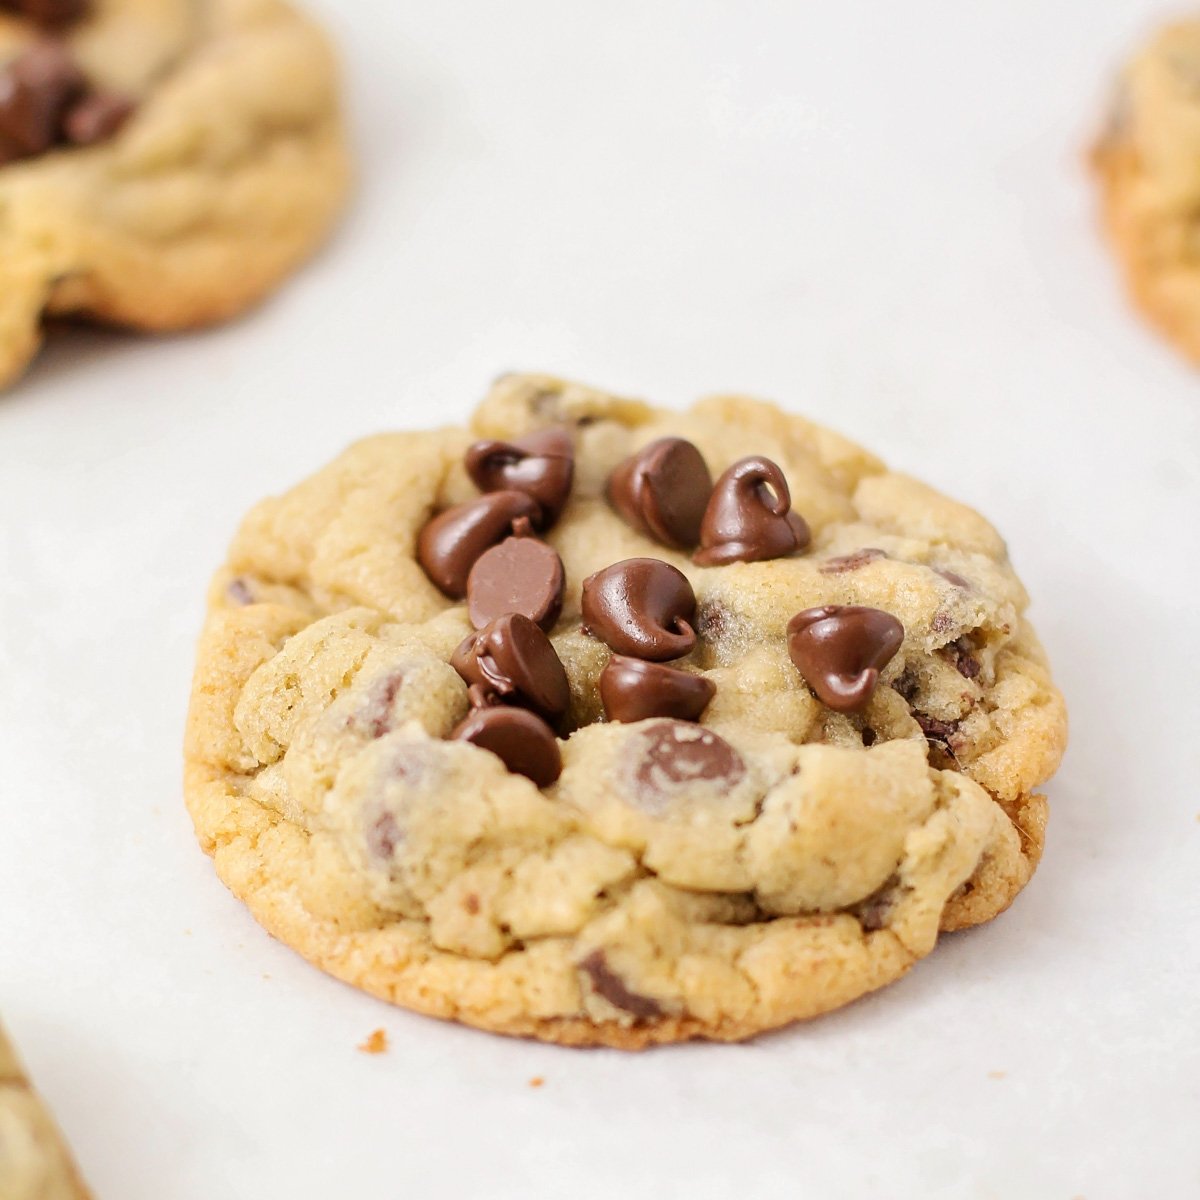 Close up of bakery style chocolate chip cookies covered with chocolate chips.